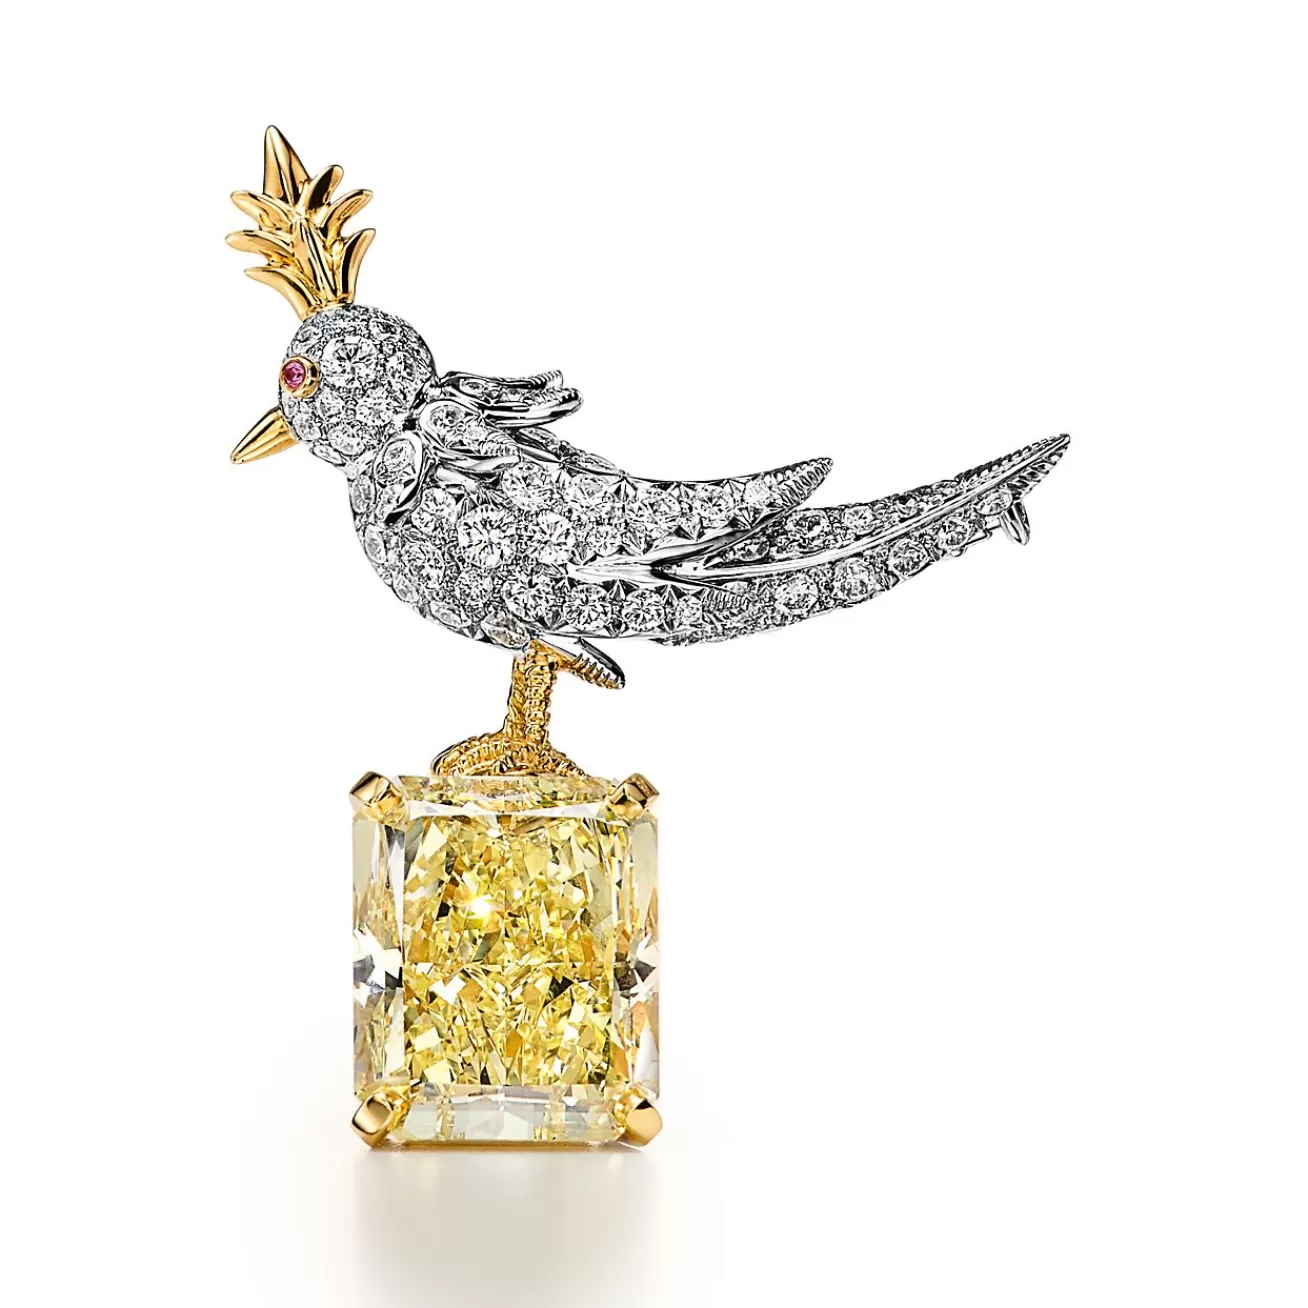 Tiffany & Co. Brooch in Platinum & Gold with a Fancy Intense Yellow Diamond and White Diamonds | ^ Brooches | Gold Jewelry